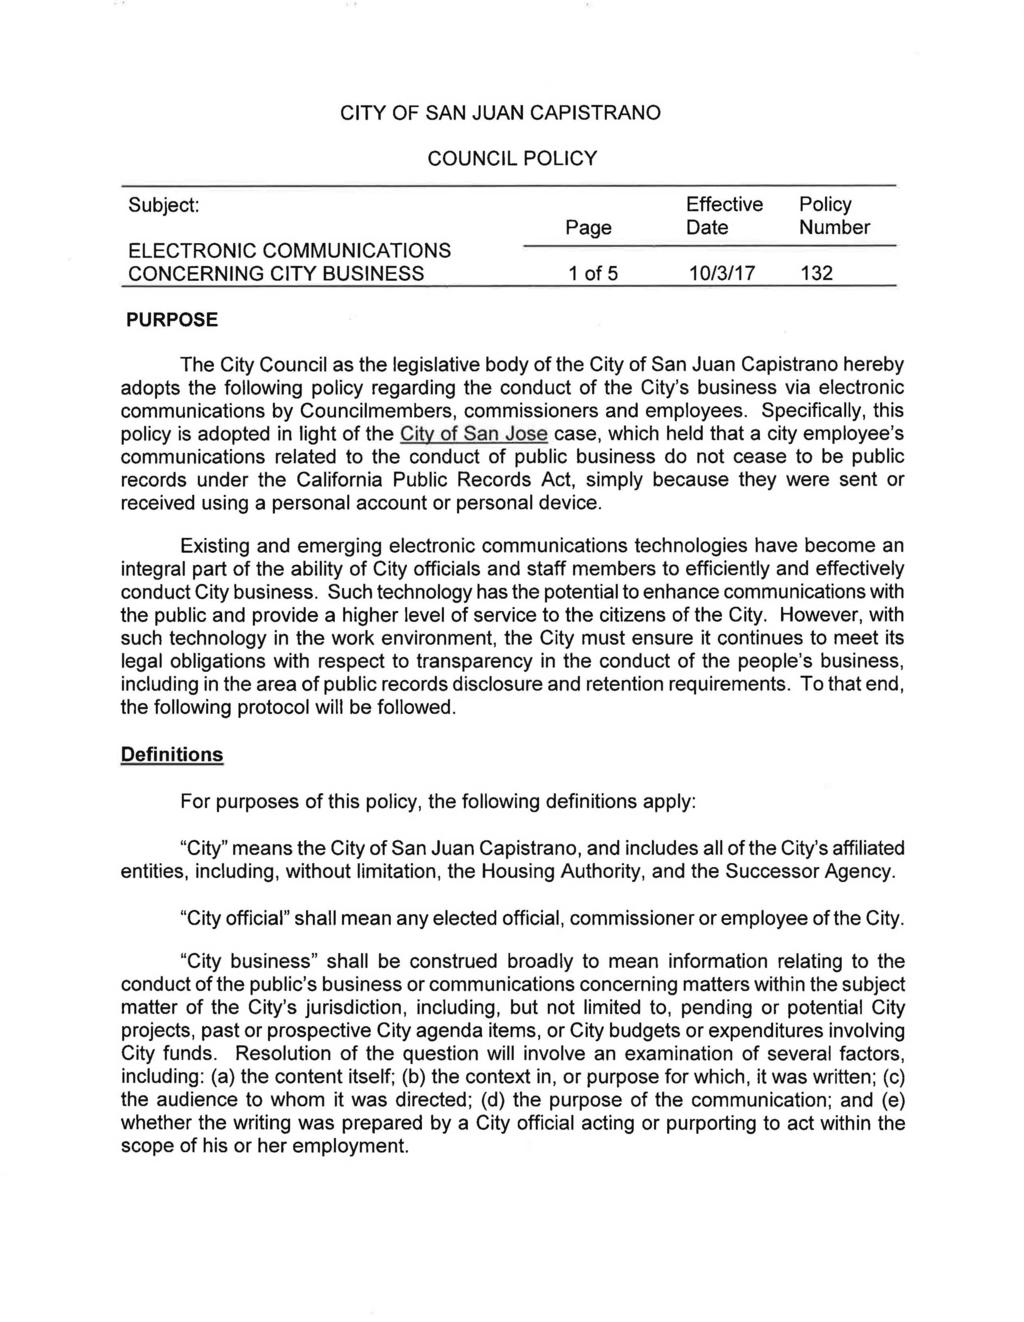 CITY OF SAN JUAN CAPISTRANO COUNCIL POLICY Subject: ELECTRONIC COMMUNICATIONS CONCERNING CITY BUSINESS Page 1 of 5 Effective Date 10/3/17 Policy Number 132 PURPOSE The City Council as the legislative